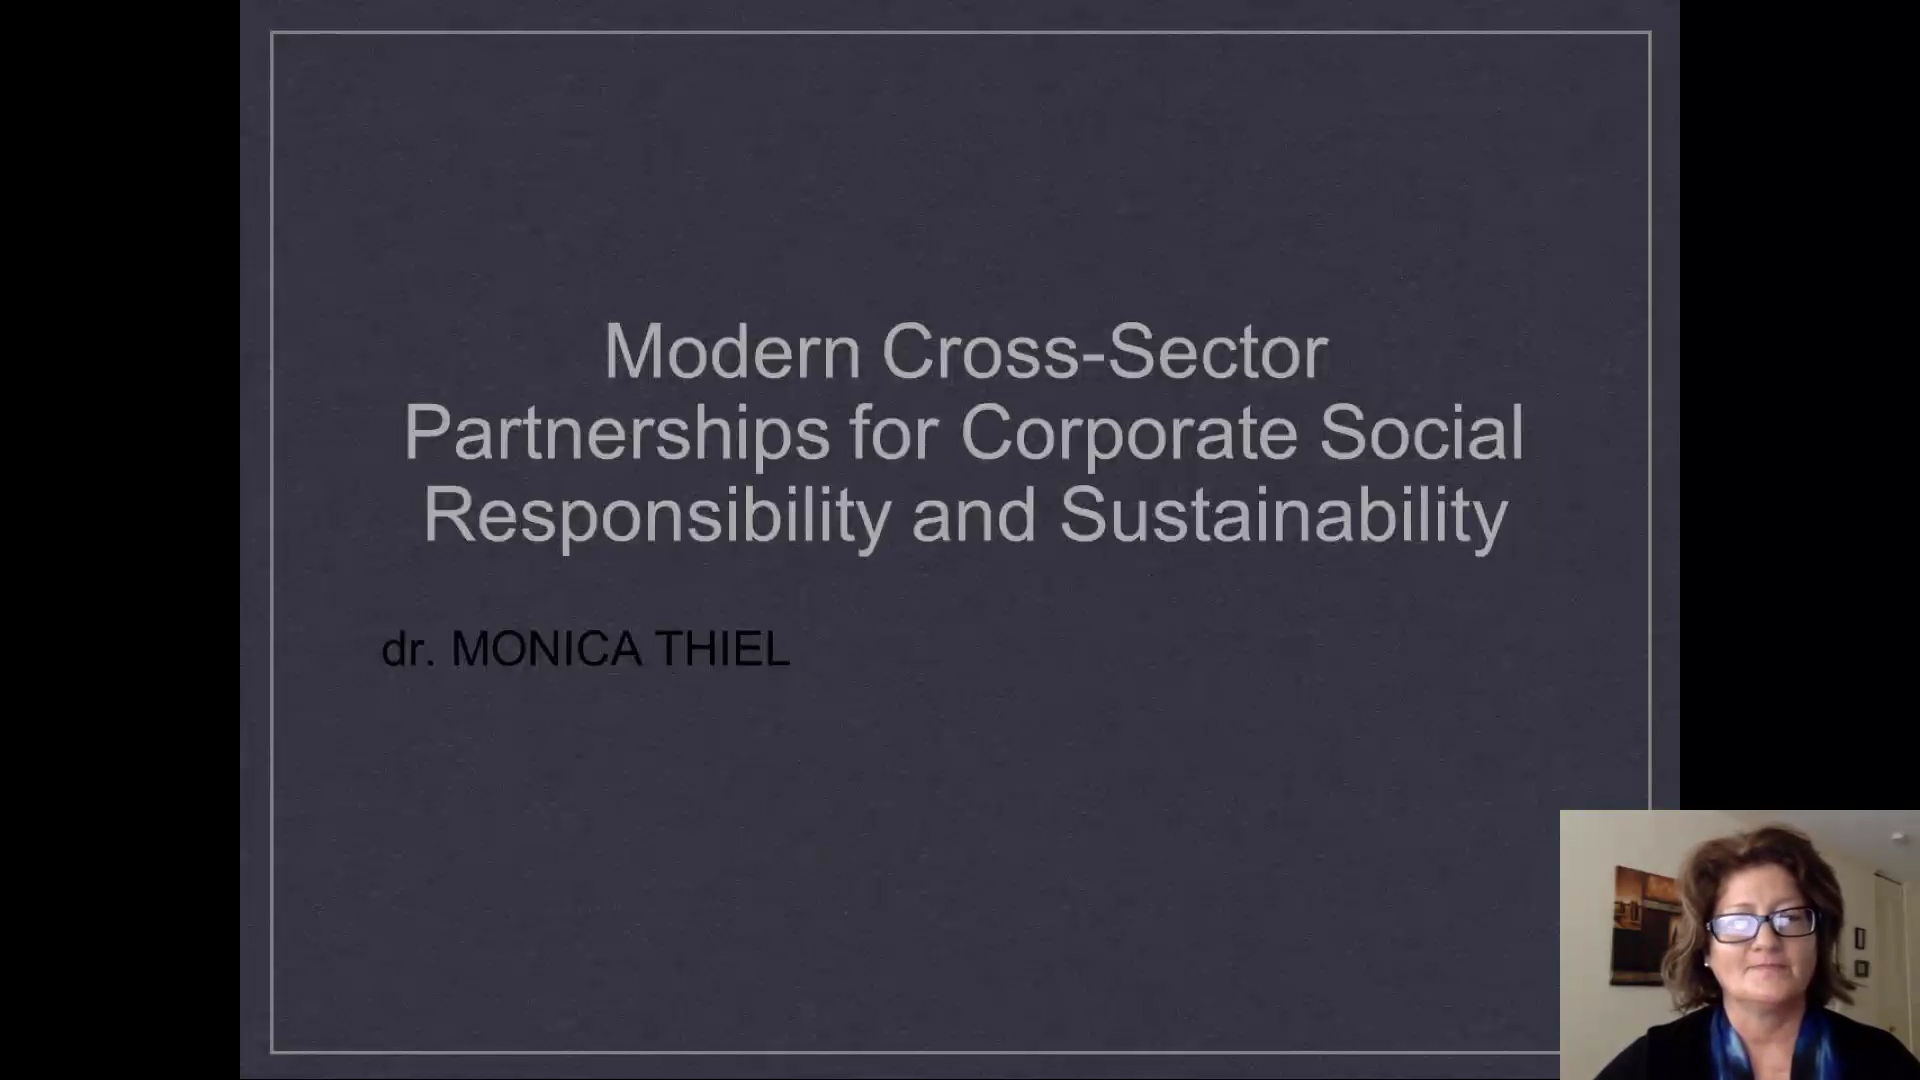 Modern Cross-Sector Partnerships for Corporate Social Responsibility and Sustainability